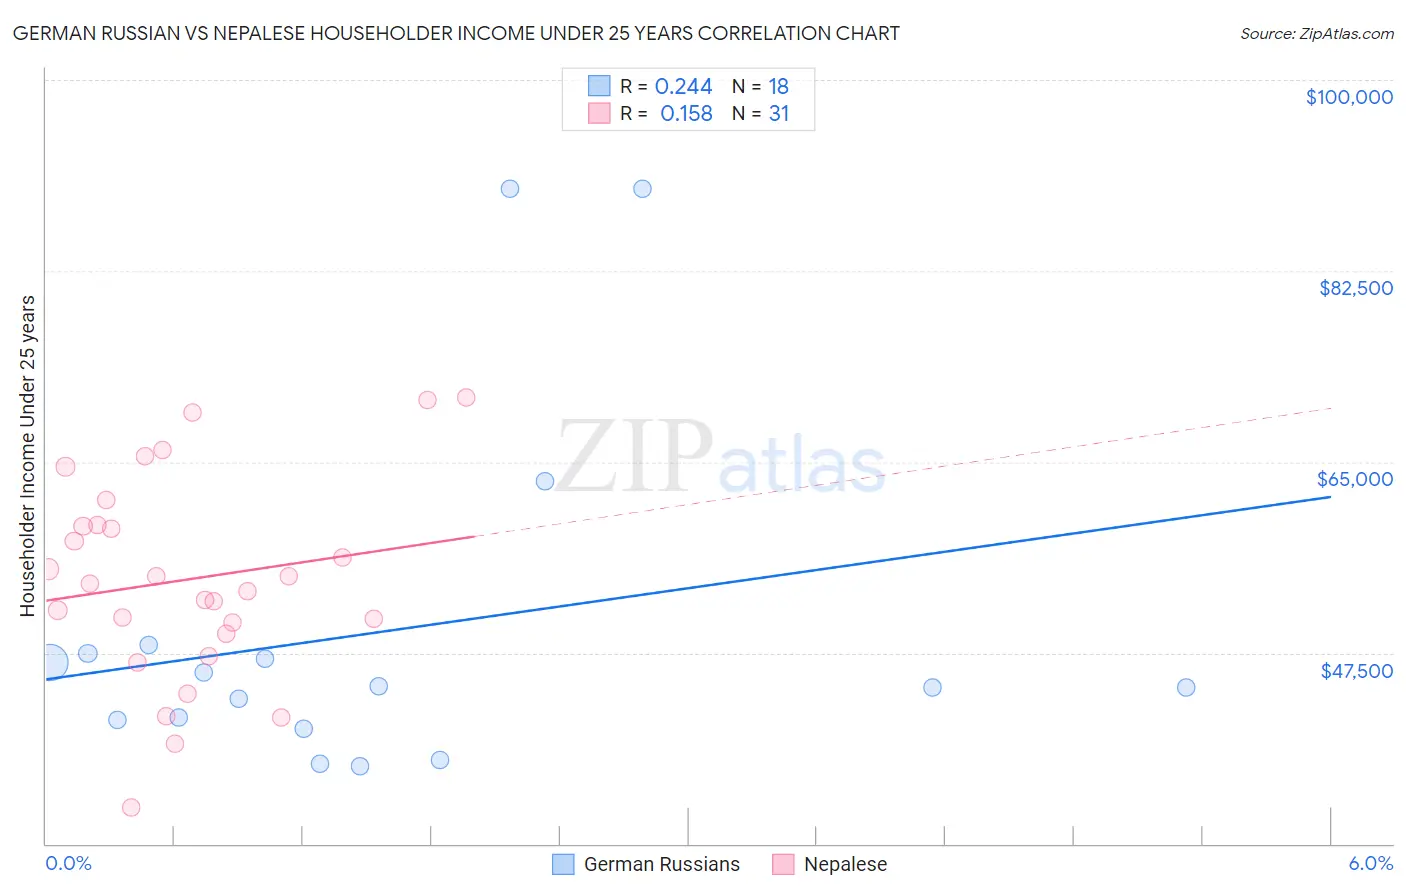 German Russian vs Nepalese Householder Income Under 25 years